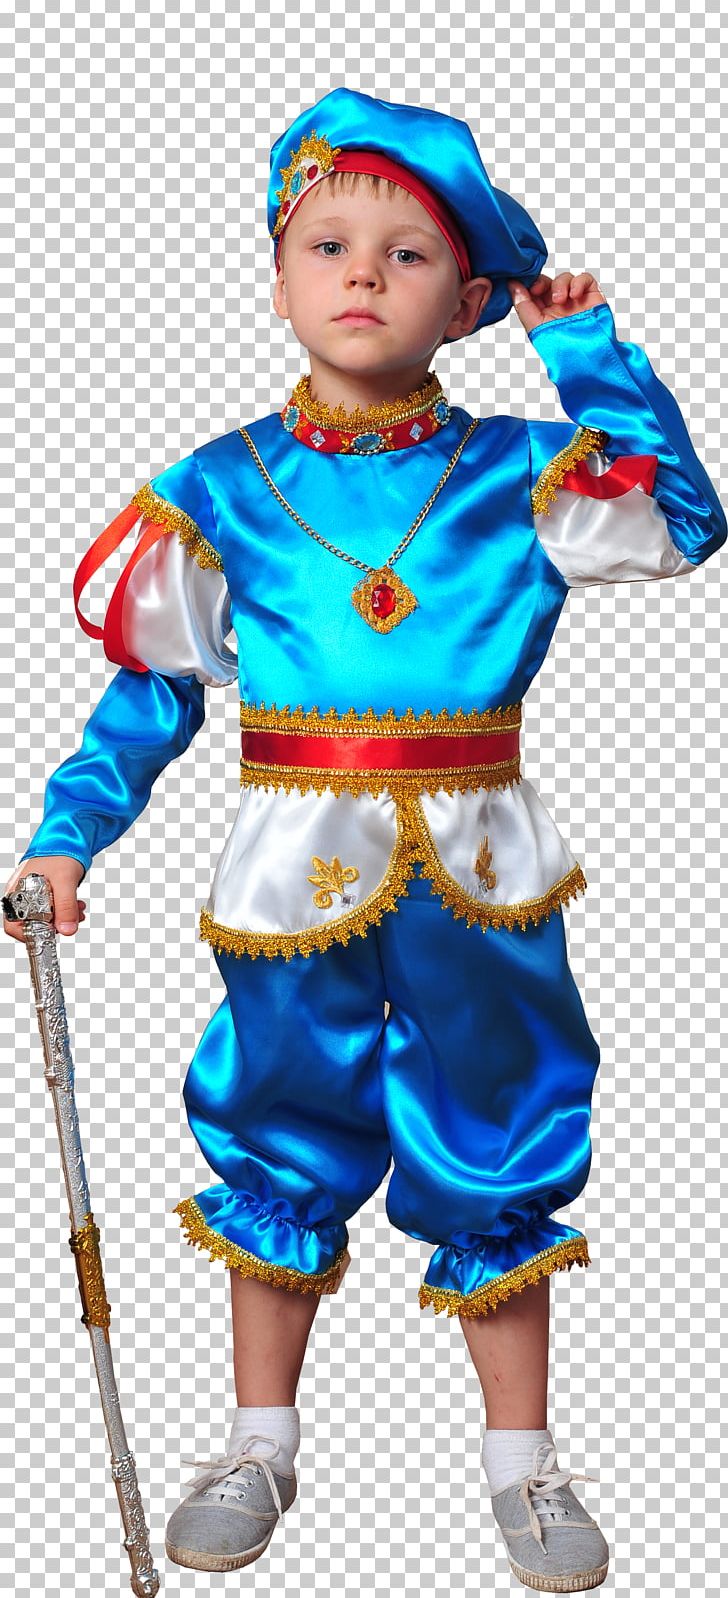 Boy Kiev Clothing Prince Costume PNG, Clipart, Artikel, Boy, Child, Childrens Clothing, Clothing Free PNG Download